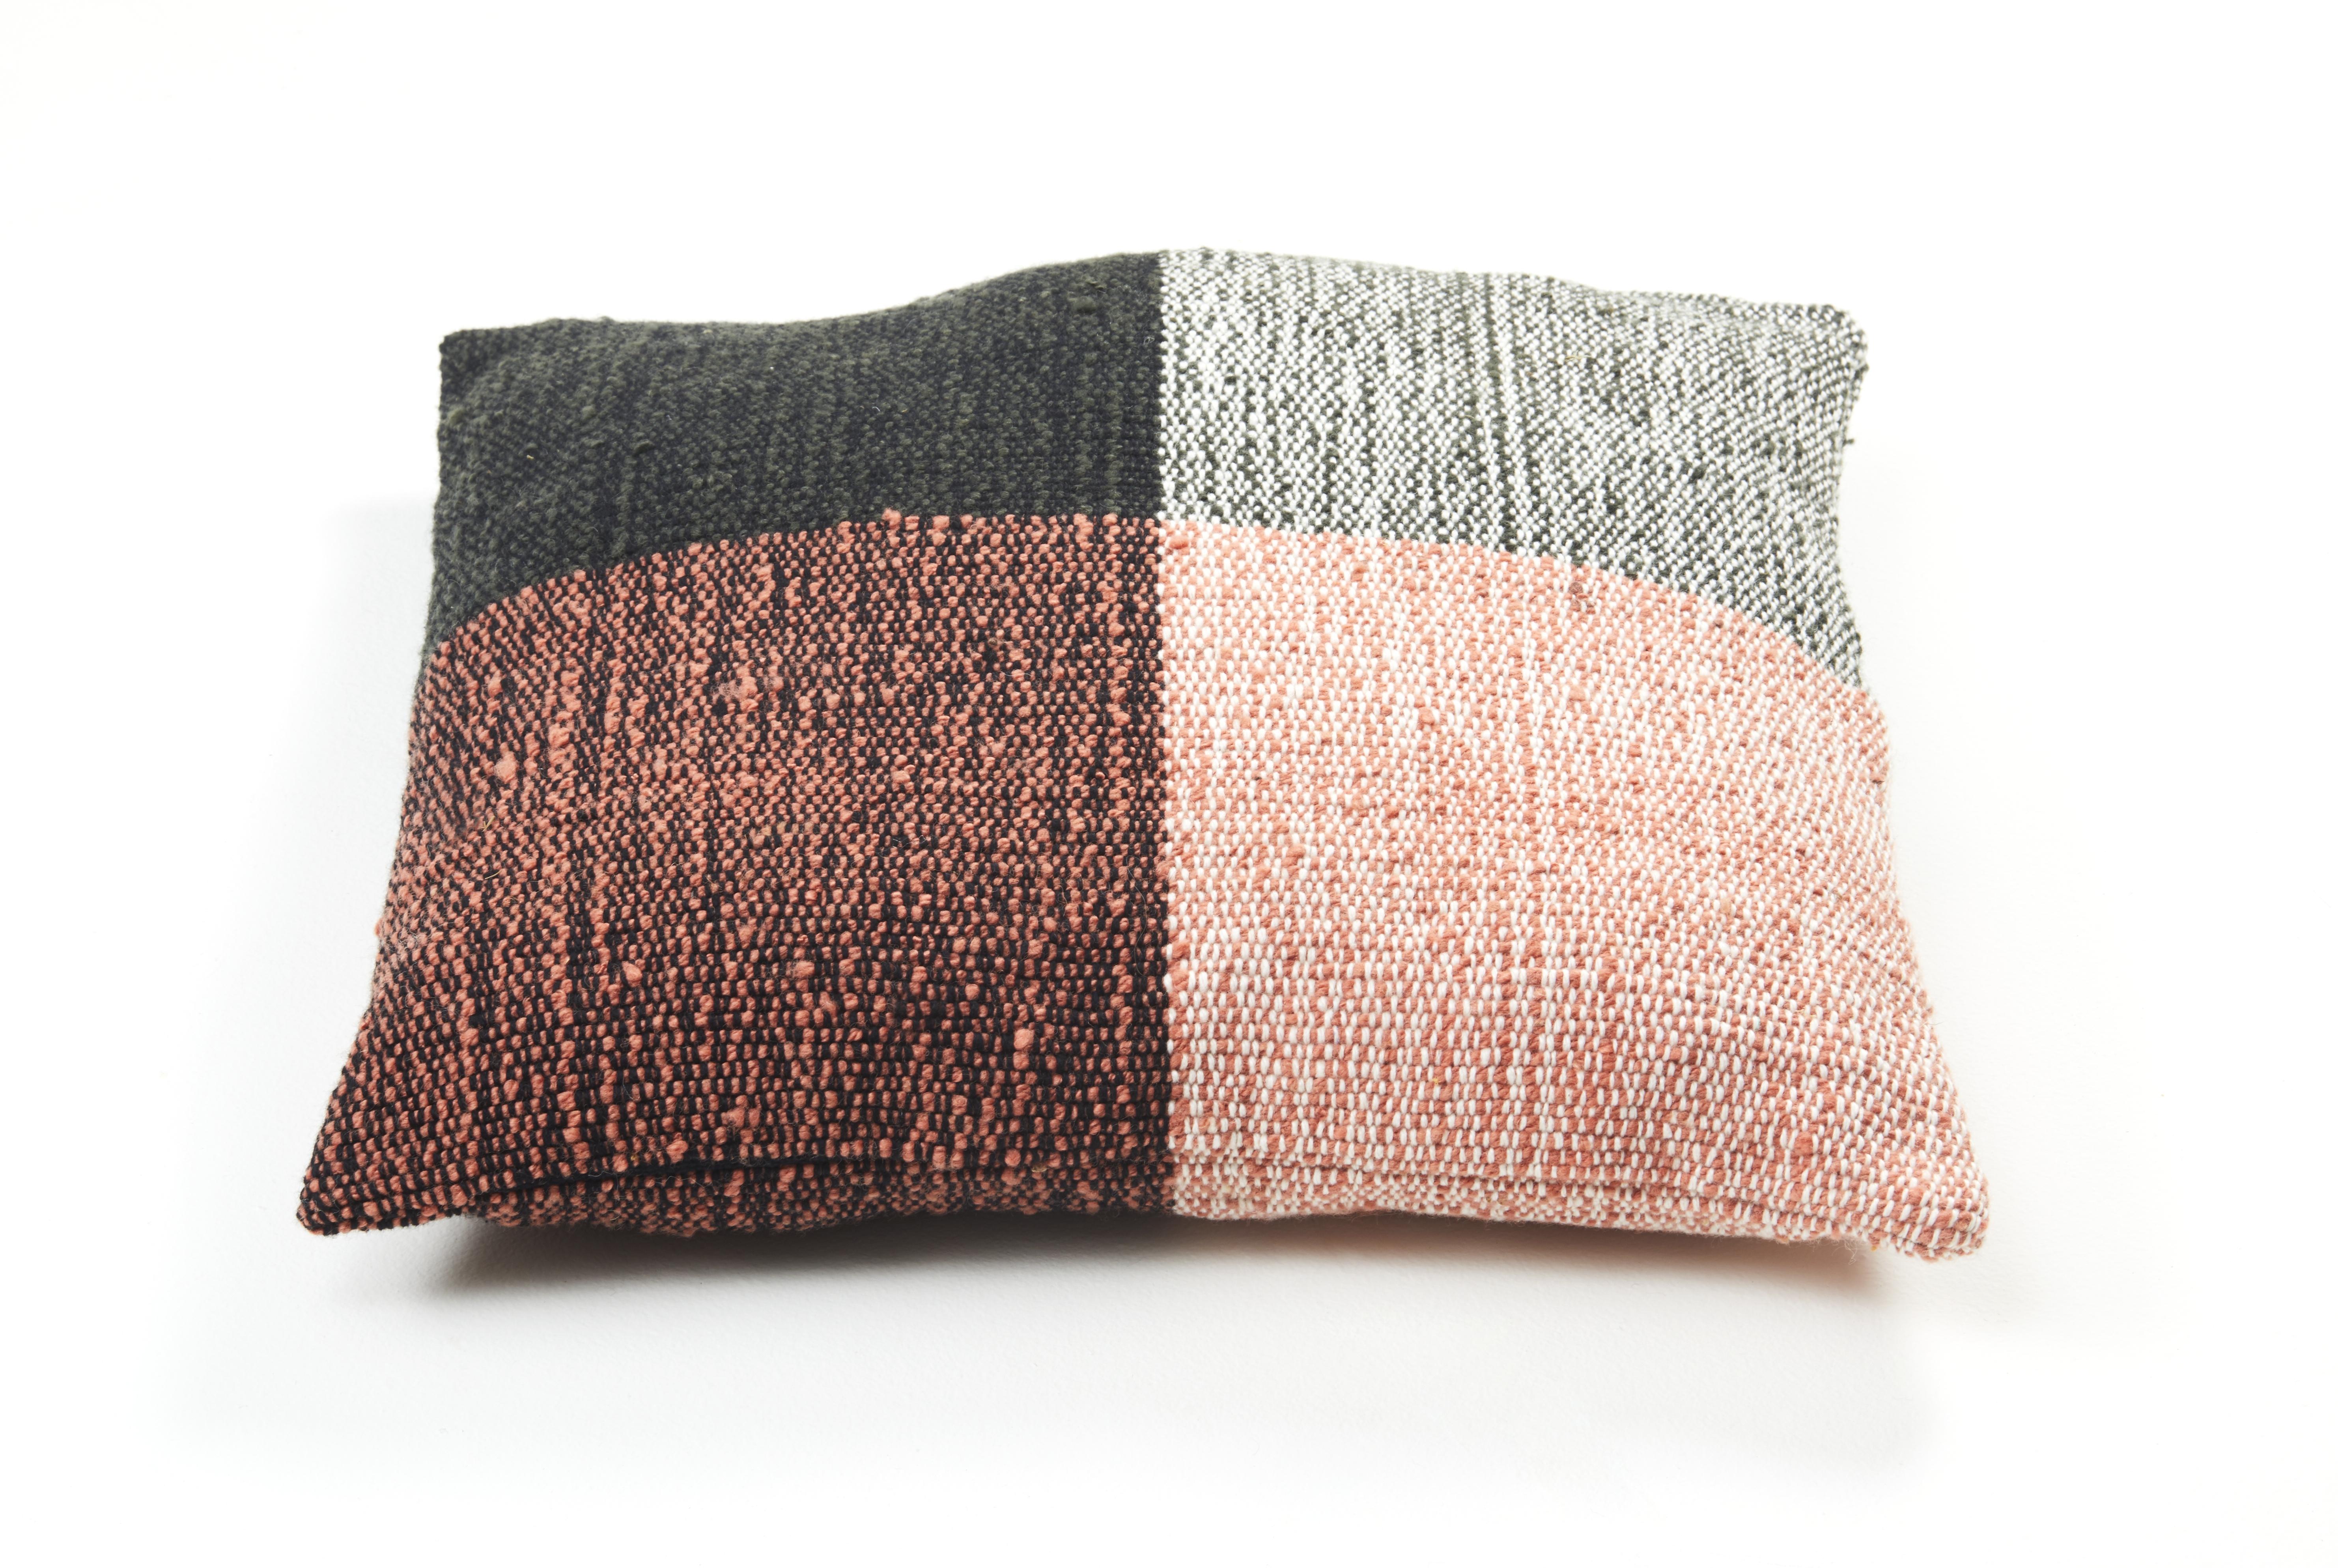 Small nobsa cushion by Sebastian Herkner
Materials: 100% natural virgin wool. 
Technique: Hand-woven in Colombia. 
Dimensions: W 50 x H 50 cm 
Available in colors: Grey/ grey/ cream, grey/ ochre/ cream, red/ ochre/ cream, blue/ mint/ cream, rose/